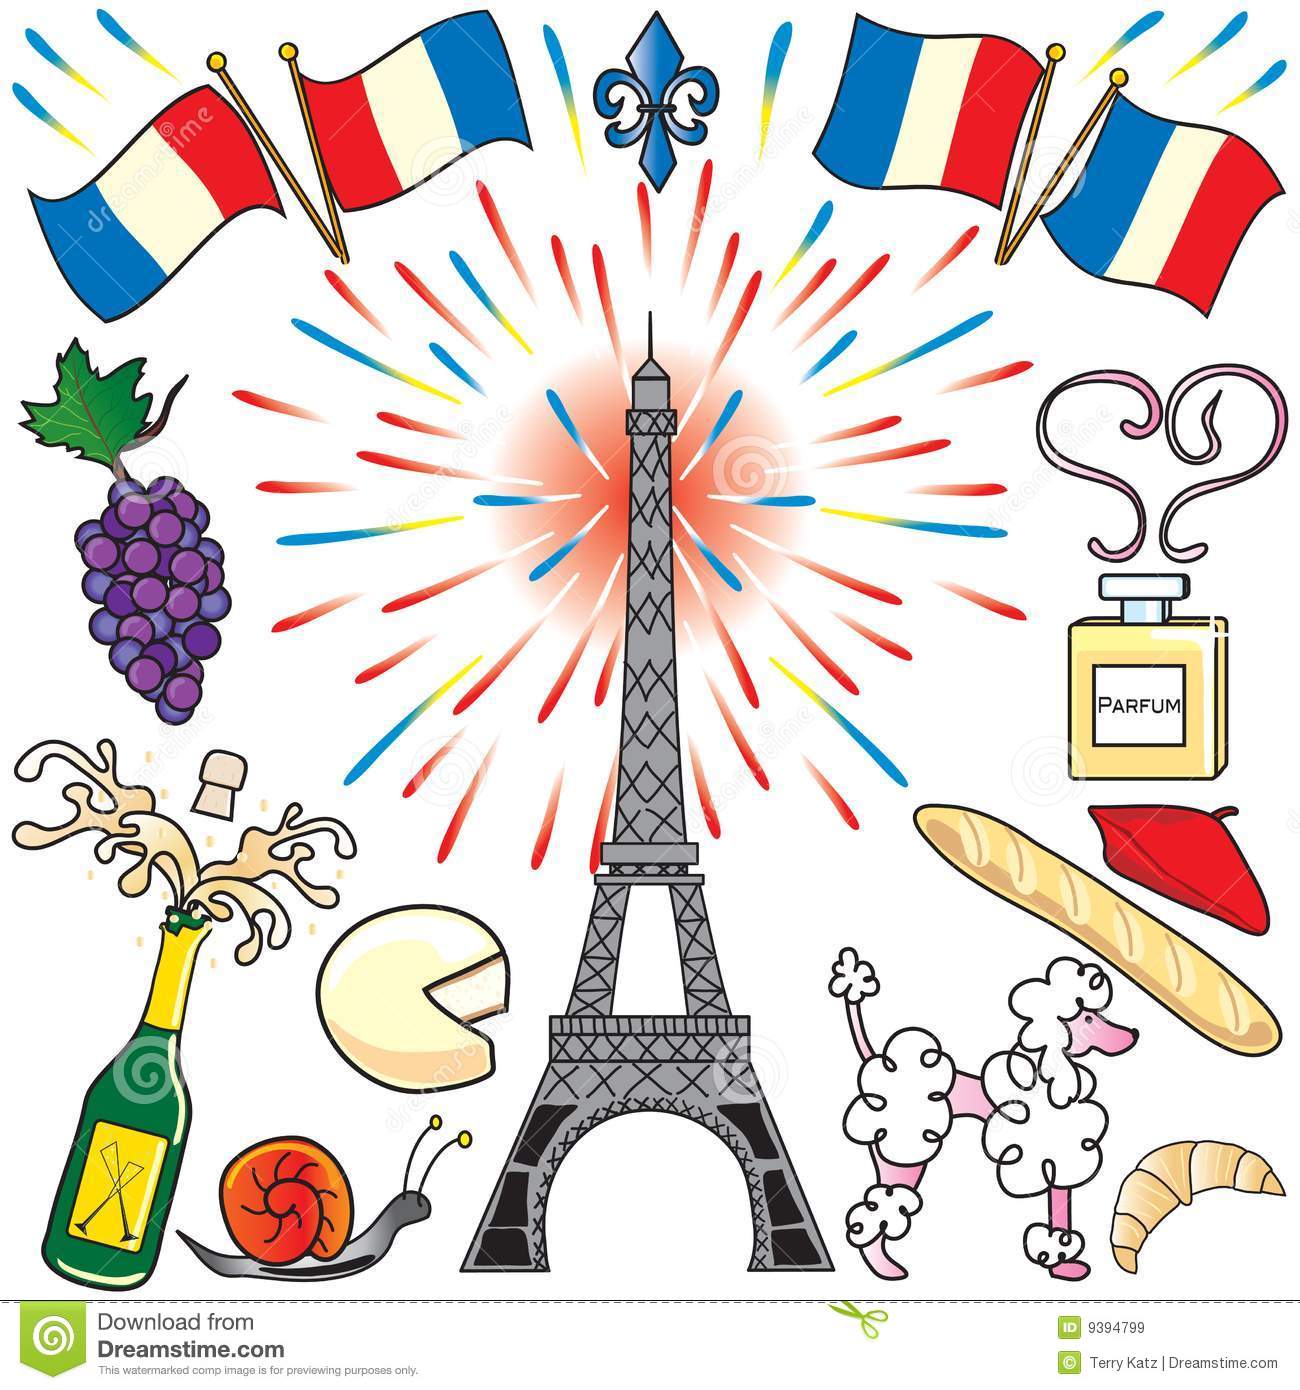 France Clip Art u0026middot; french clipart